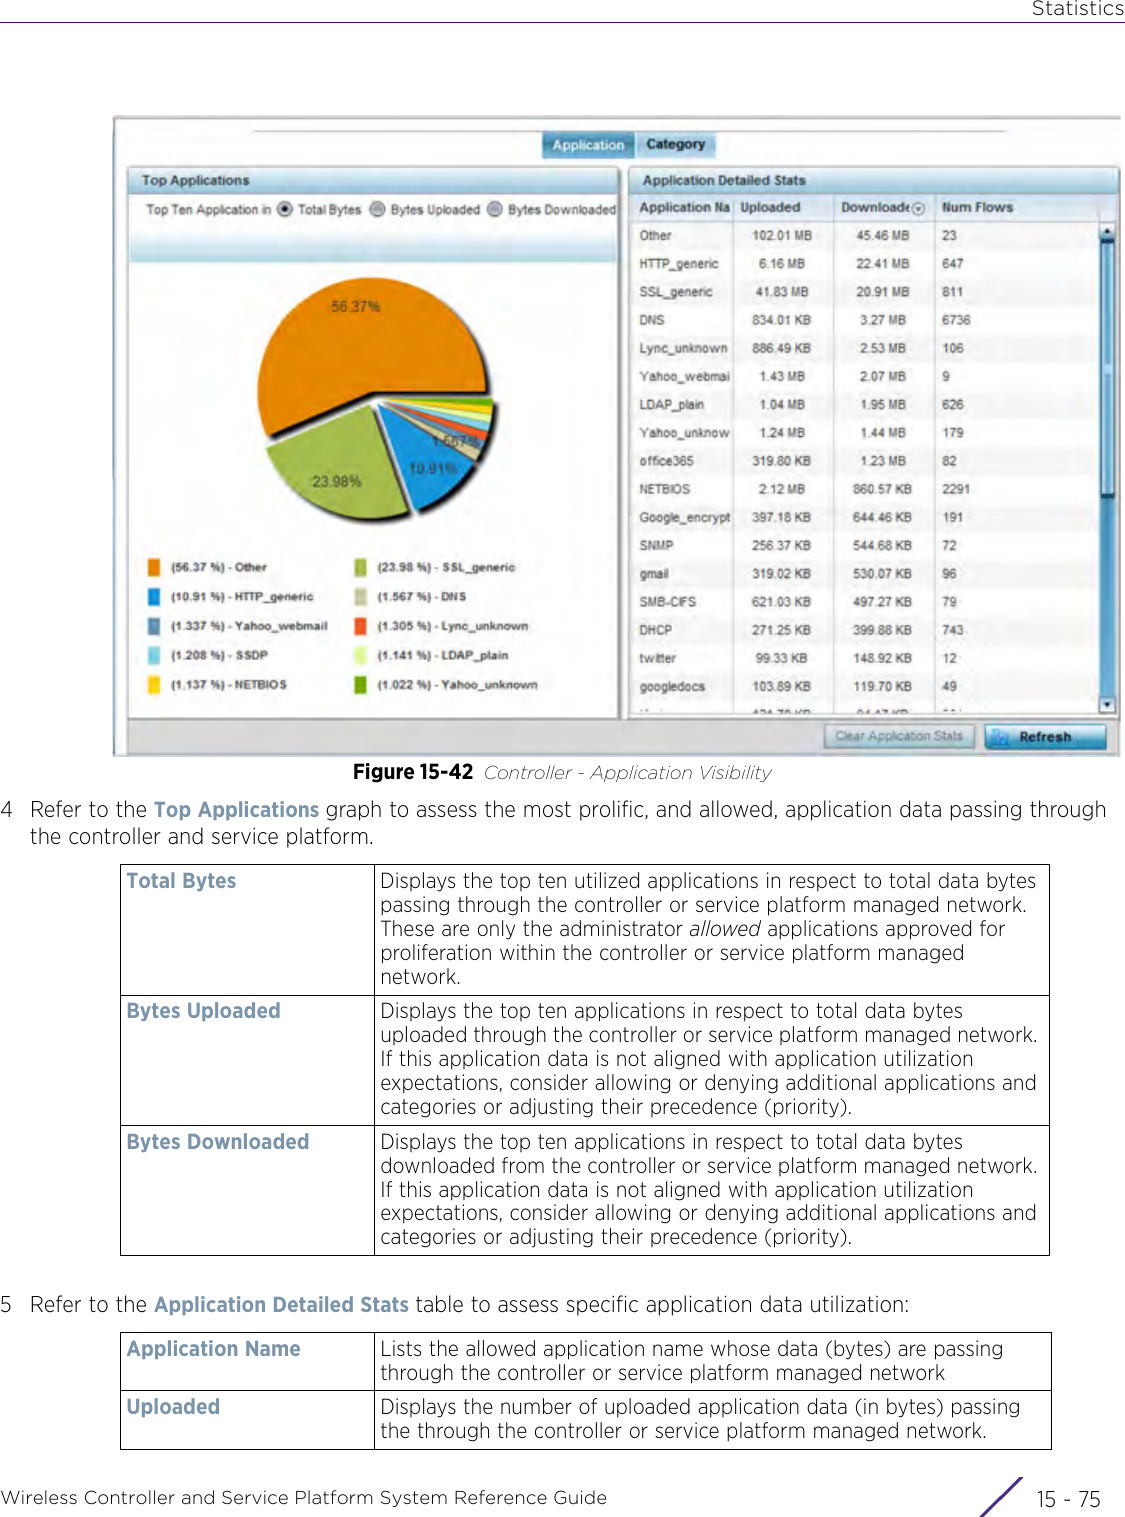 StatisticsWireless Controller and Service Platform System Reference Guide 15 - 75Figure 15-42 Controller - Application Visibility4 Refer to the Top Applications graph to assess the most prolific, and allowed, application data passing through the controller and service platform.5 Refer to the Application Detailed Stats table to assess specific application data utilization:Total Bytes Displays the top ten utilized applications in respect to total data bytes passing through the controller or service platform managed network. These are only the administrator allowed applications approved for proliferation within the controller or service platform managed network.Bytes Uploaded Displays the top ten applications in respect to total data bytes uploaded through the controller or service platform managed network. If this application data is not aligned with application utilization expectations, consider allowing or denying additional applications and categories or adjusting their precedence (priority).Bytes Downloaded Displays the top ten applications in respect to total data bytes downloaded from the controller or service platform managed network. If this application data is not aligned with application utilization expectations, consider allowing or denying additional applications and categories or adjusting their precedence (priority).Application Name Lists the allowed application name whose data (bytes) are passing through the controller or service platform managed networkUploaded Displays the number of uploaded application data (in bytes) passing the through the controller or service platform managed network. 